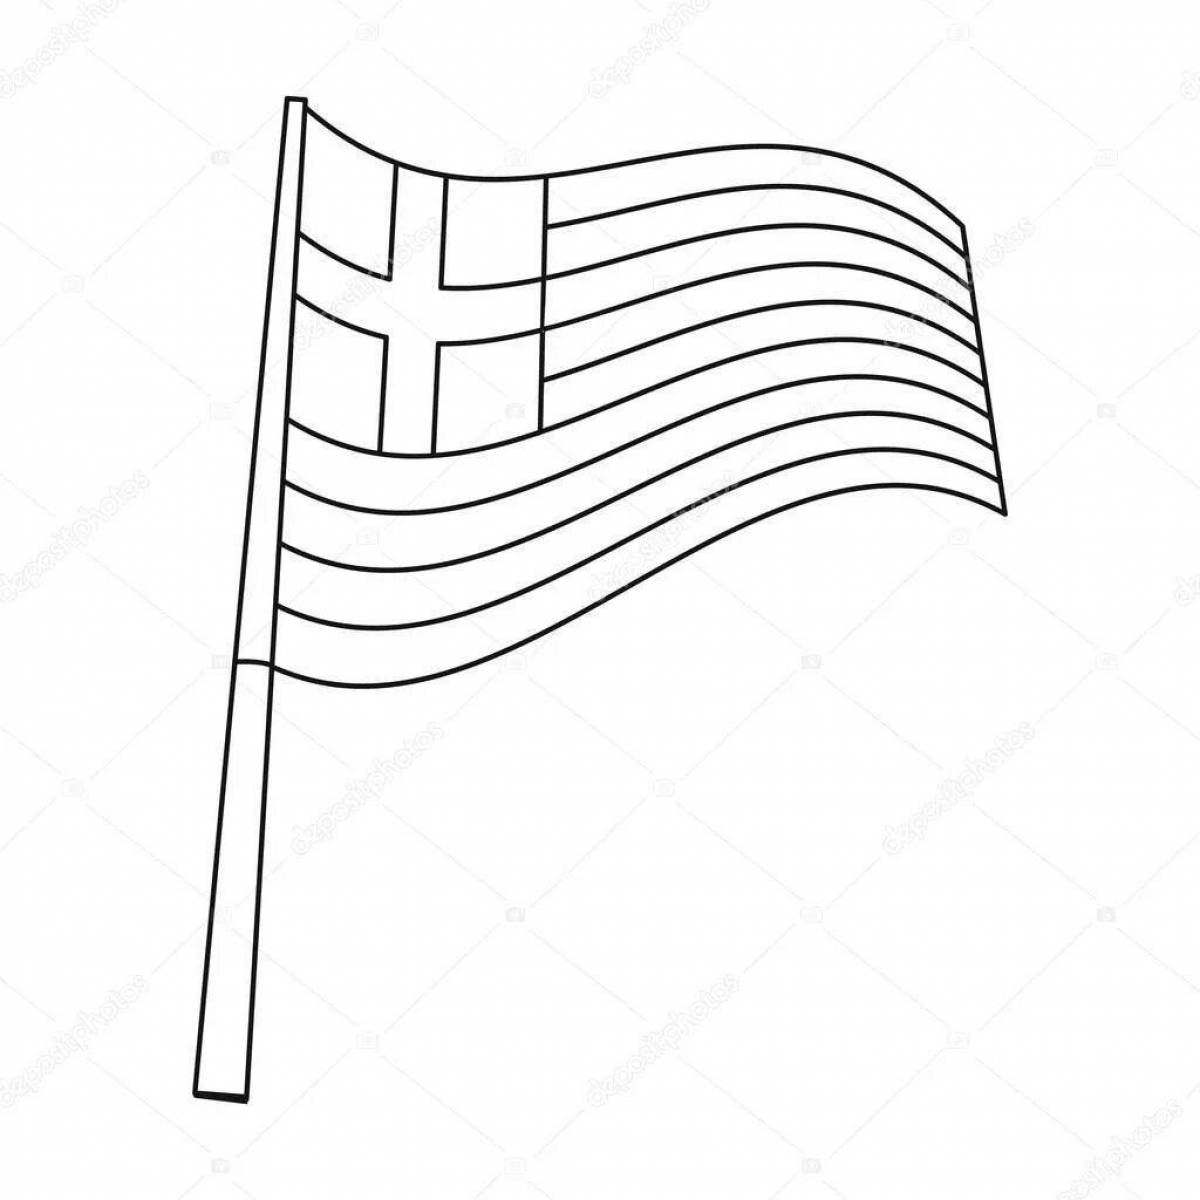 Animated greece flag coloring page